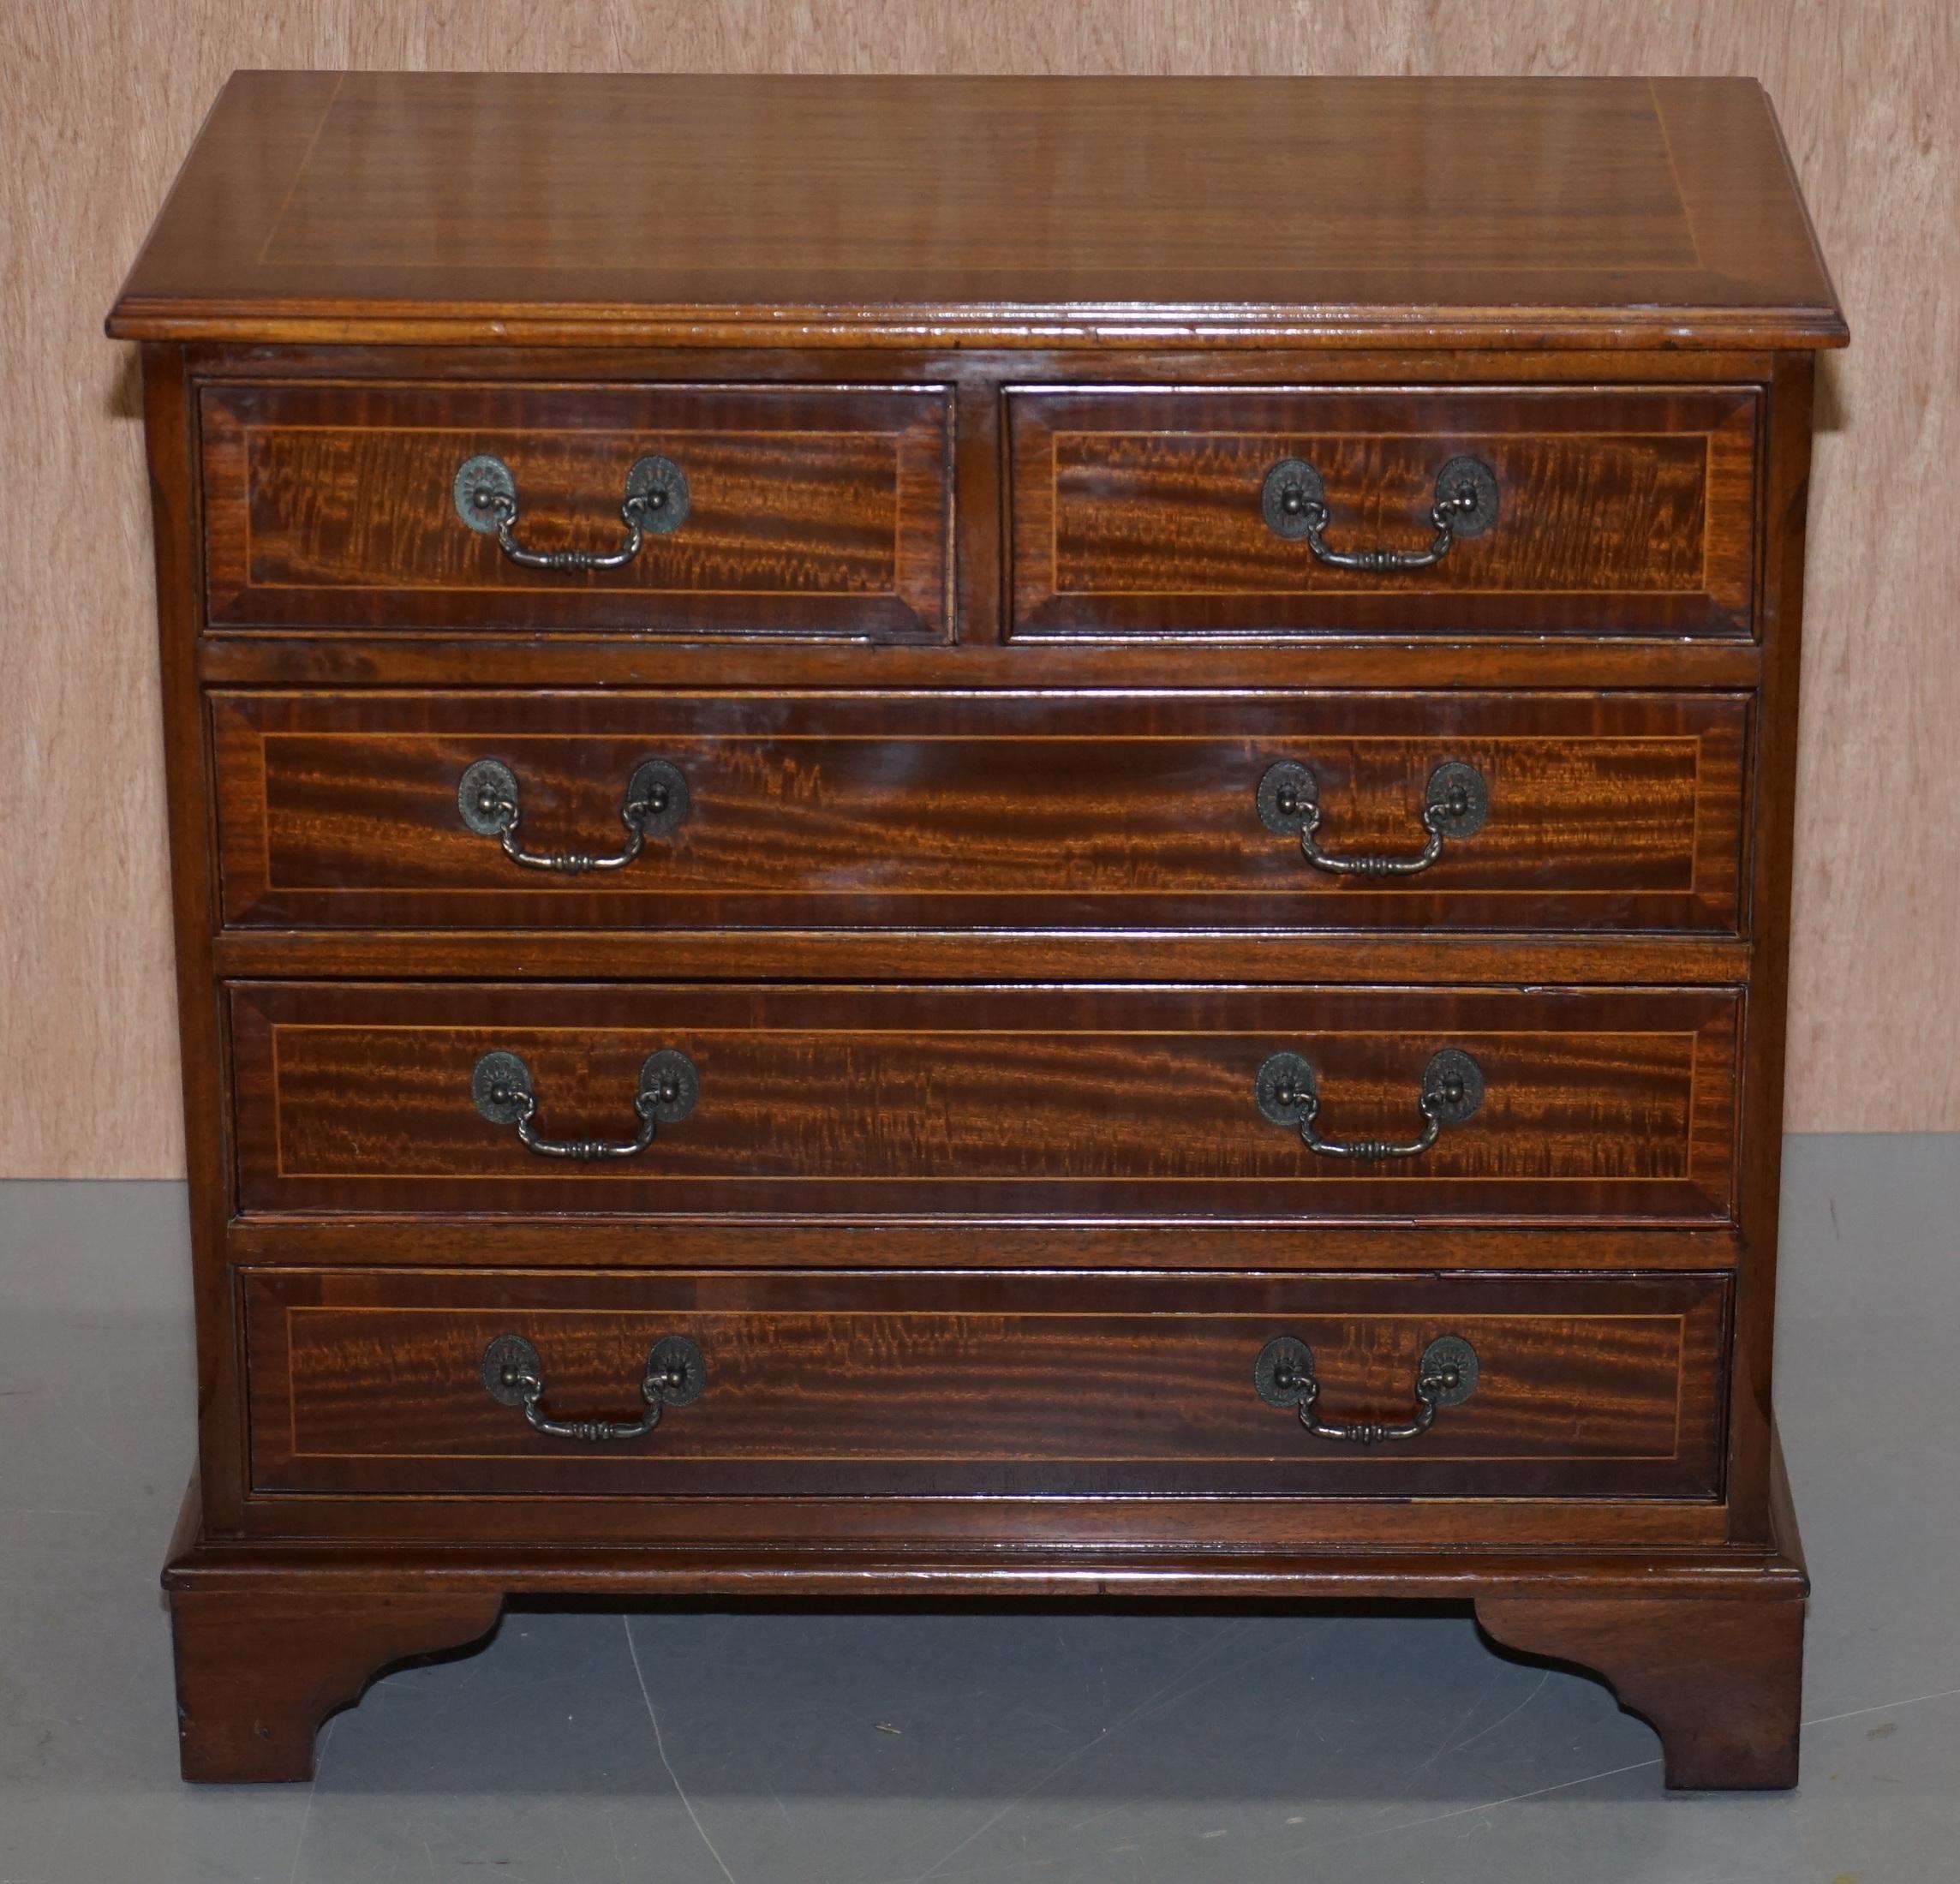 We are delighted to this lovely side table sized vintage flamed mahogany two over three chest of drawers

A very well made piece, the timber is all flamed mahogany and in the right light has a lovely golden patina

We have cleaned waxed and